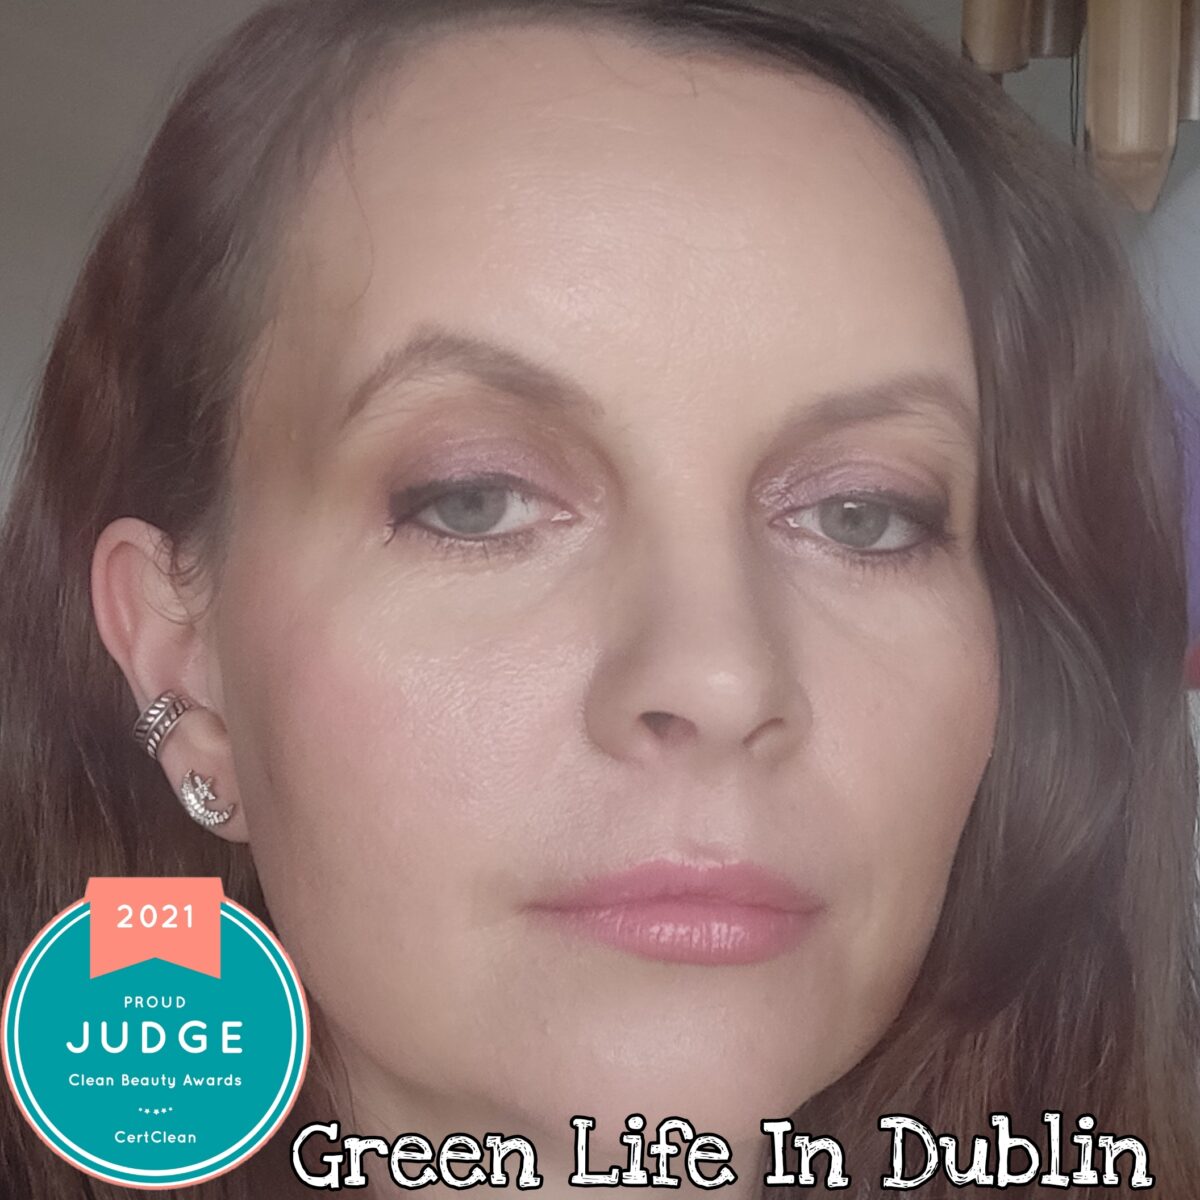 Judging for Clean Beauty Awards 2021 – Green Life In Dublin